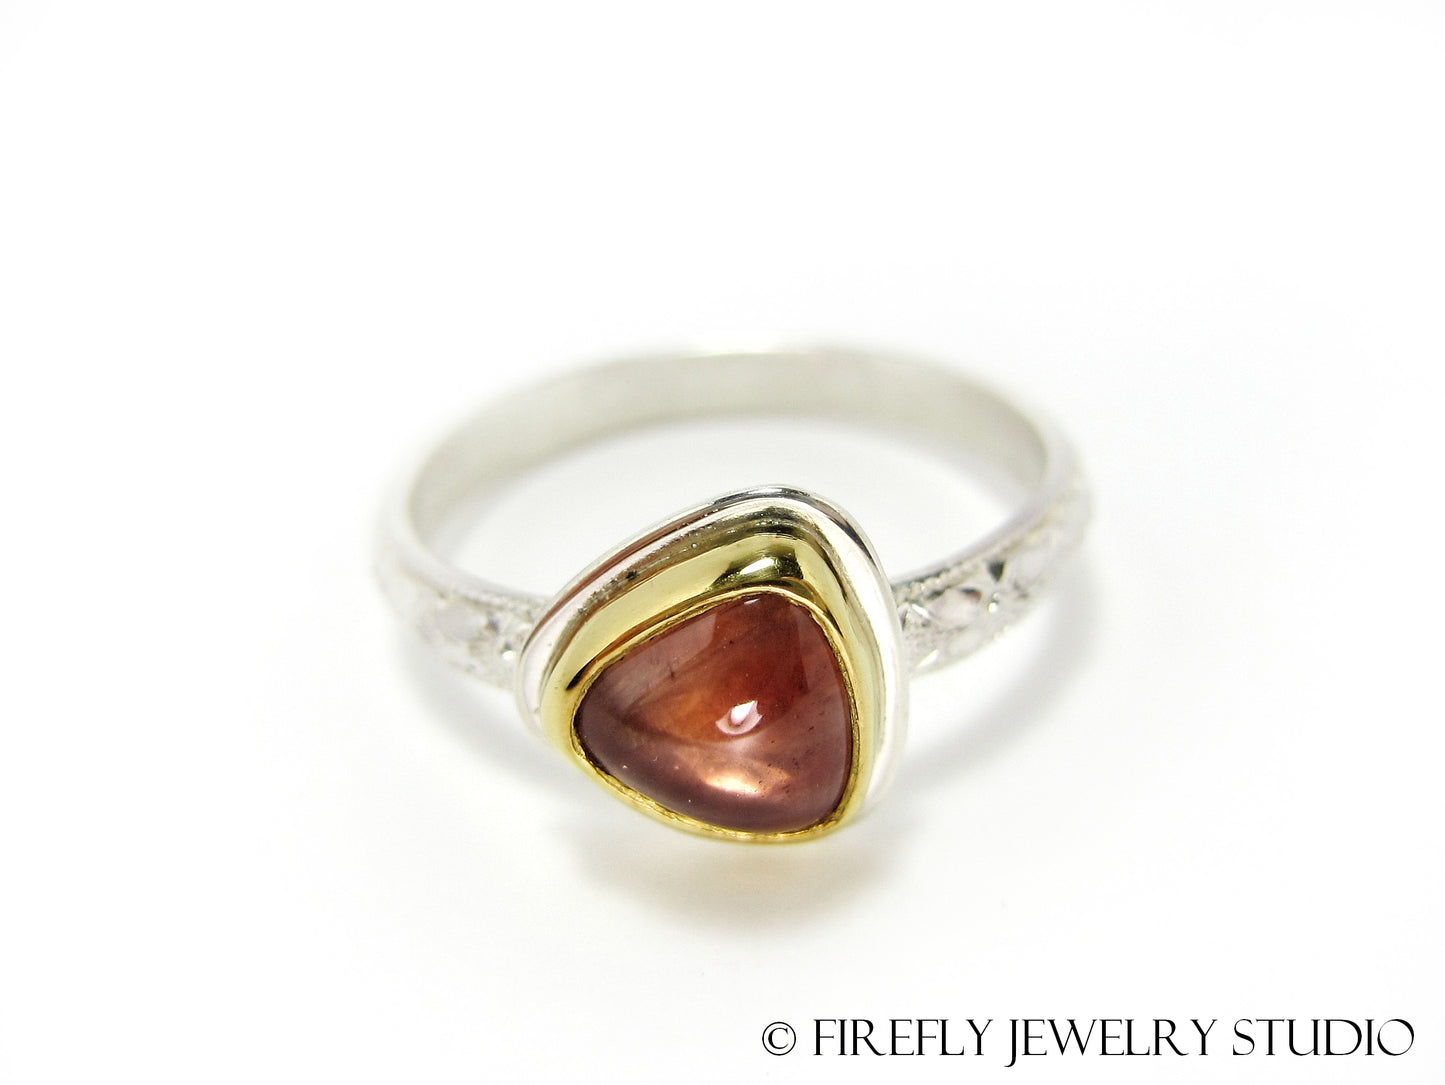 Sunstone Trine Ring in 24k Gold and Sterling. Size 7.75 - Firefly Jewelry Studio